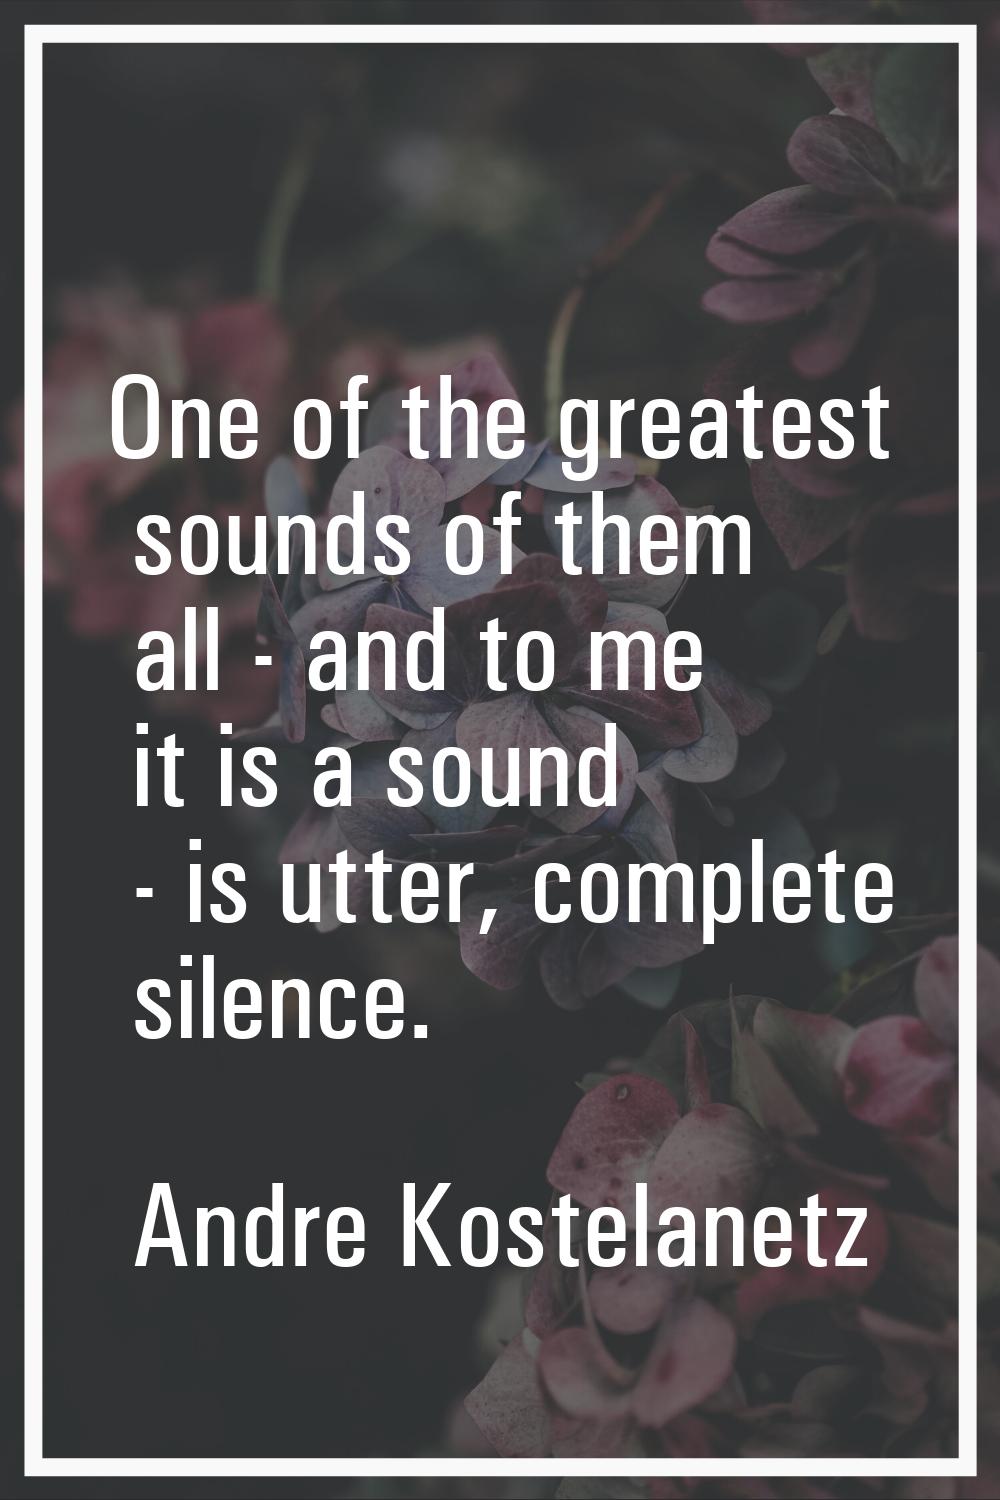 One of the greatest sounds of them all - and to me it is a sound - is utter, complete silence.